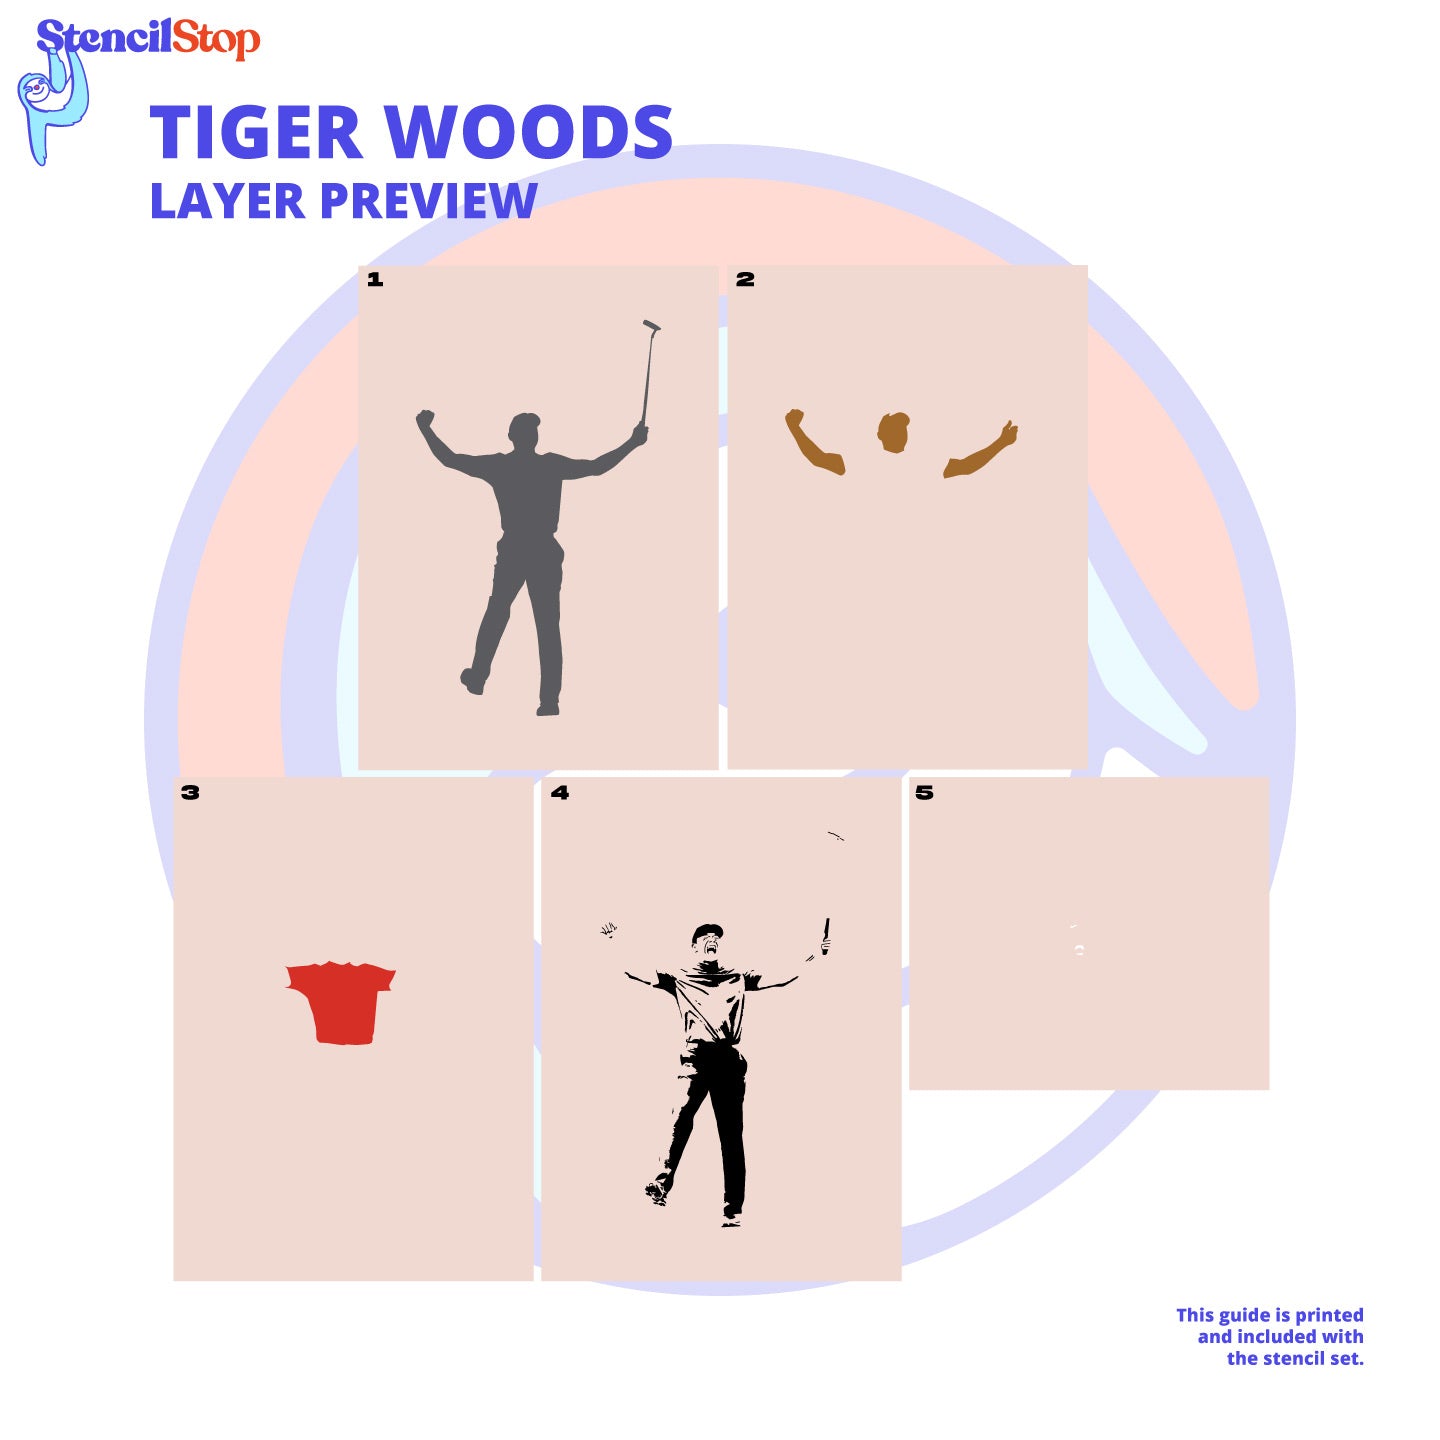 Tiger Woods "Victory" Layered Stencil Preview